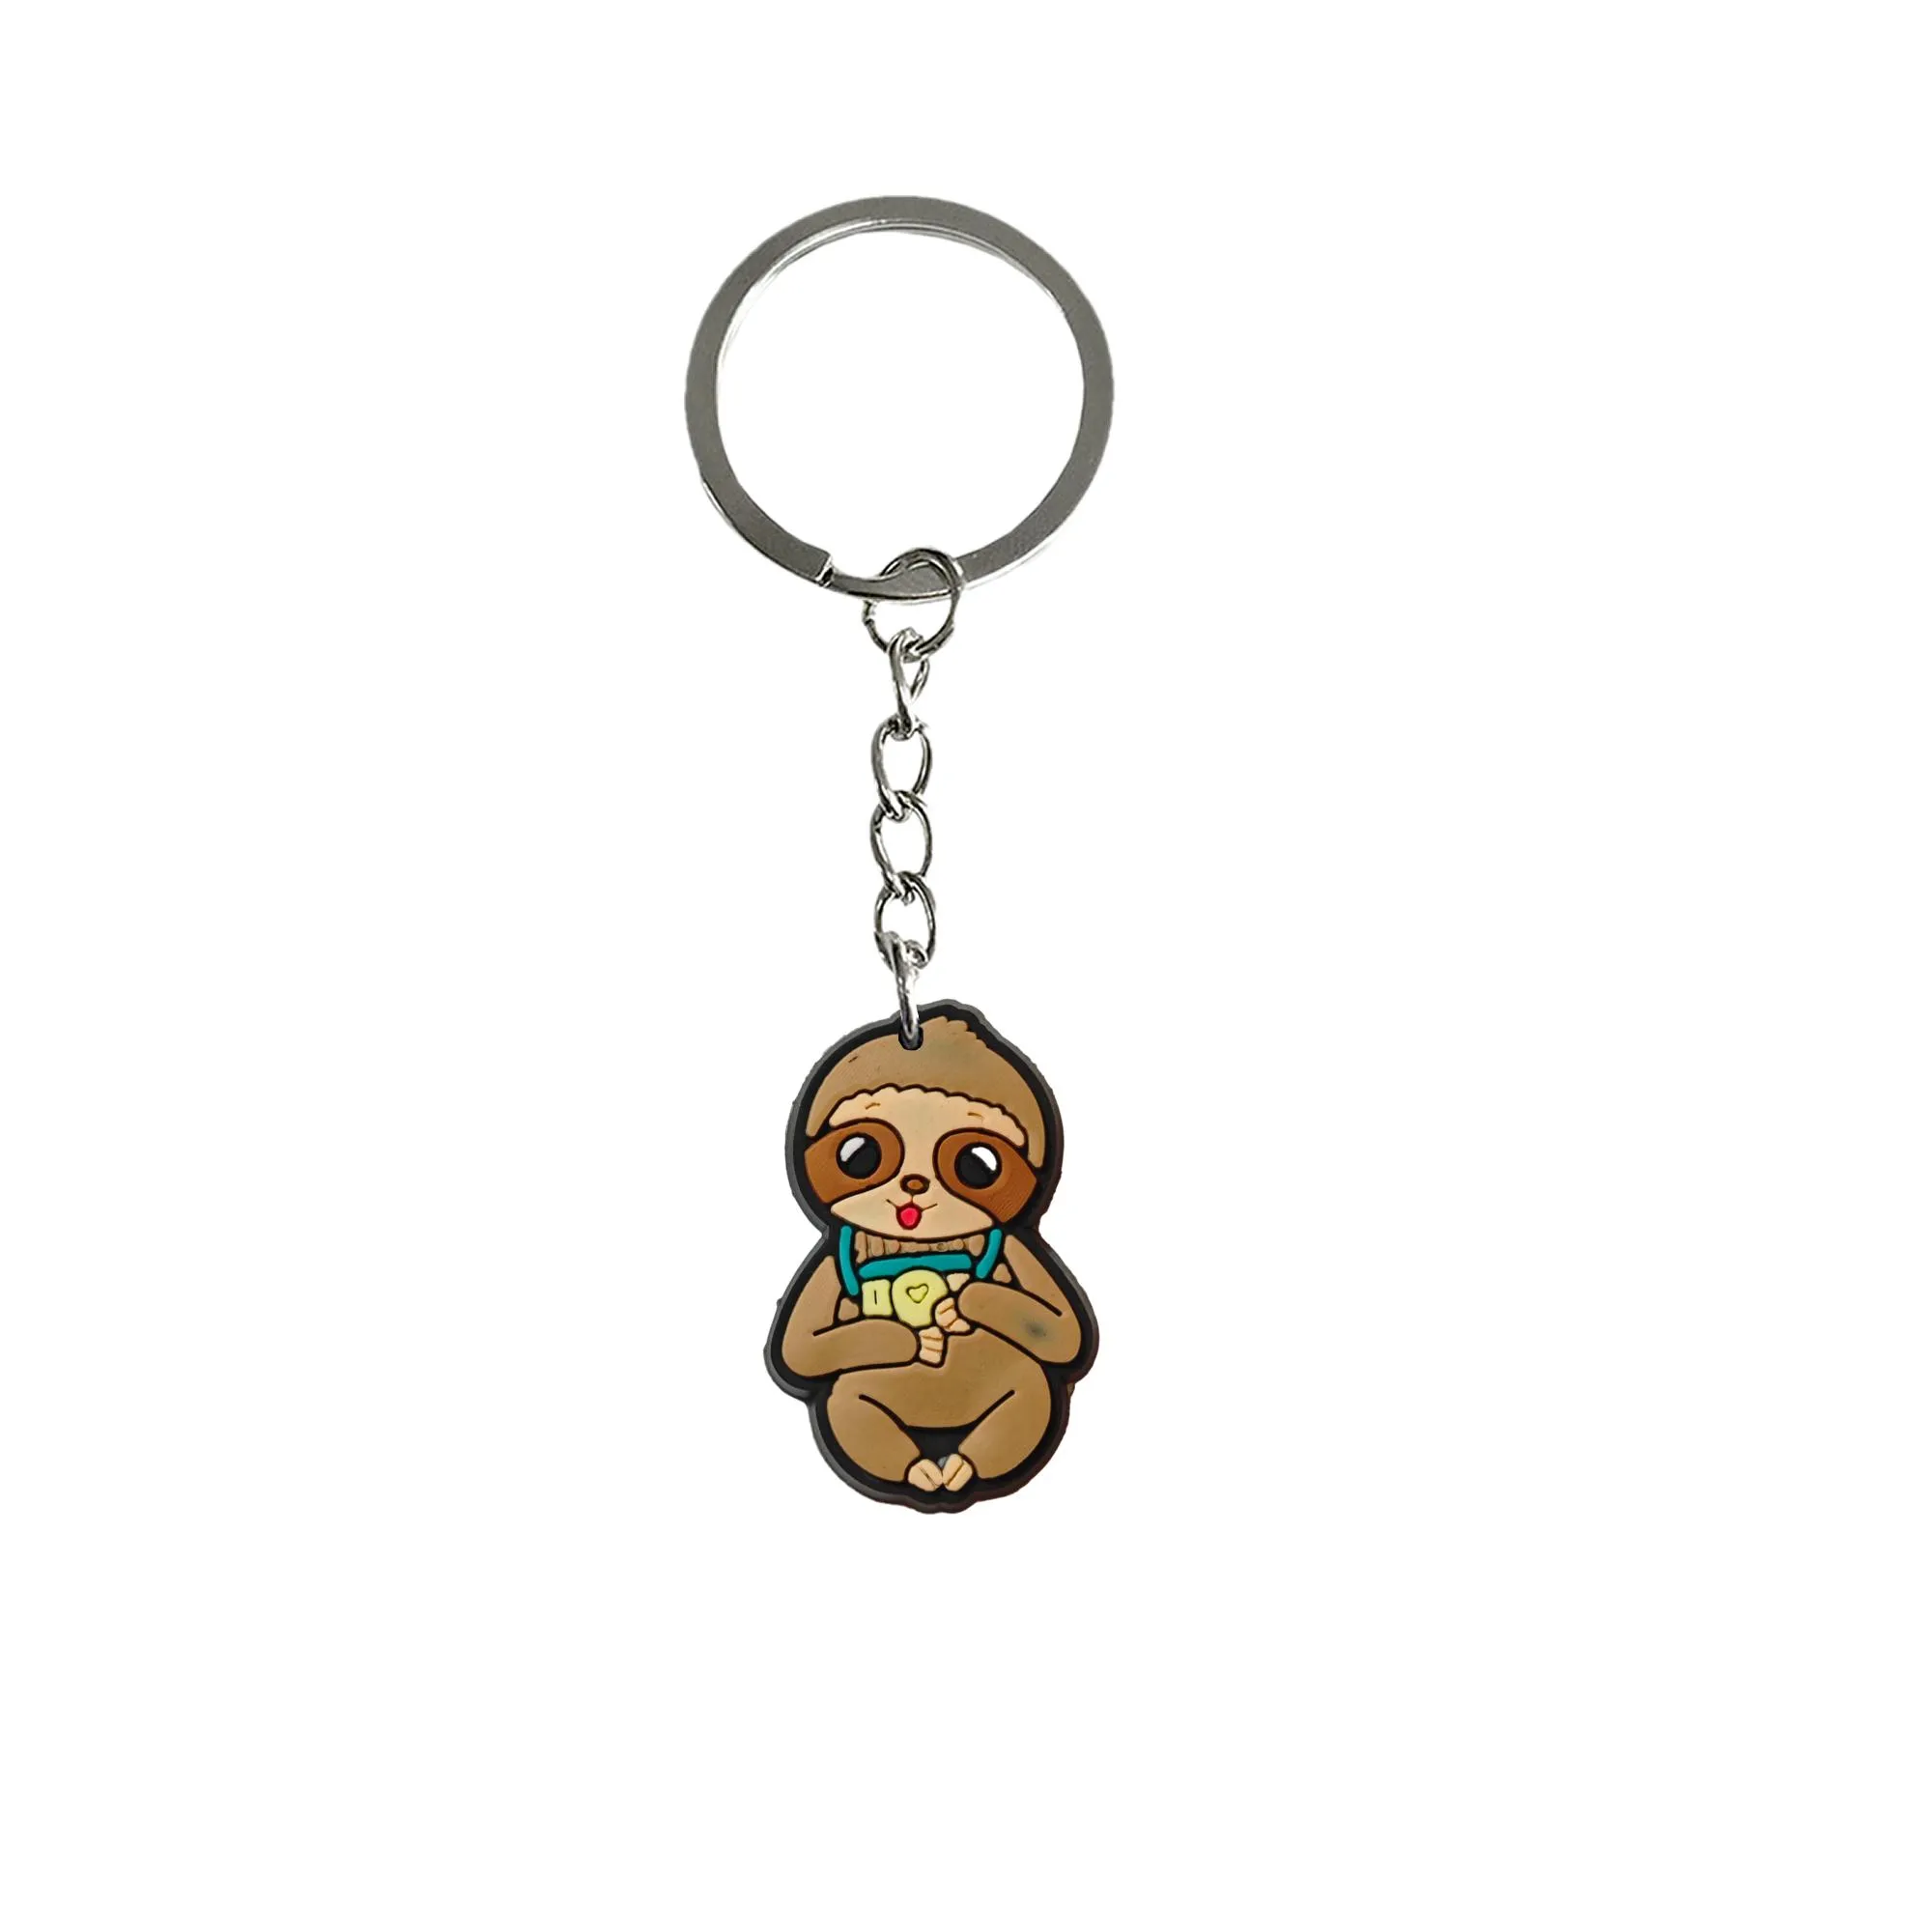 monkey keychain for goodie bag stuffers supplies keyring classroom school day birthday party gift suitable schoolbag backpacks key ring men cute silicone chain adult